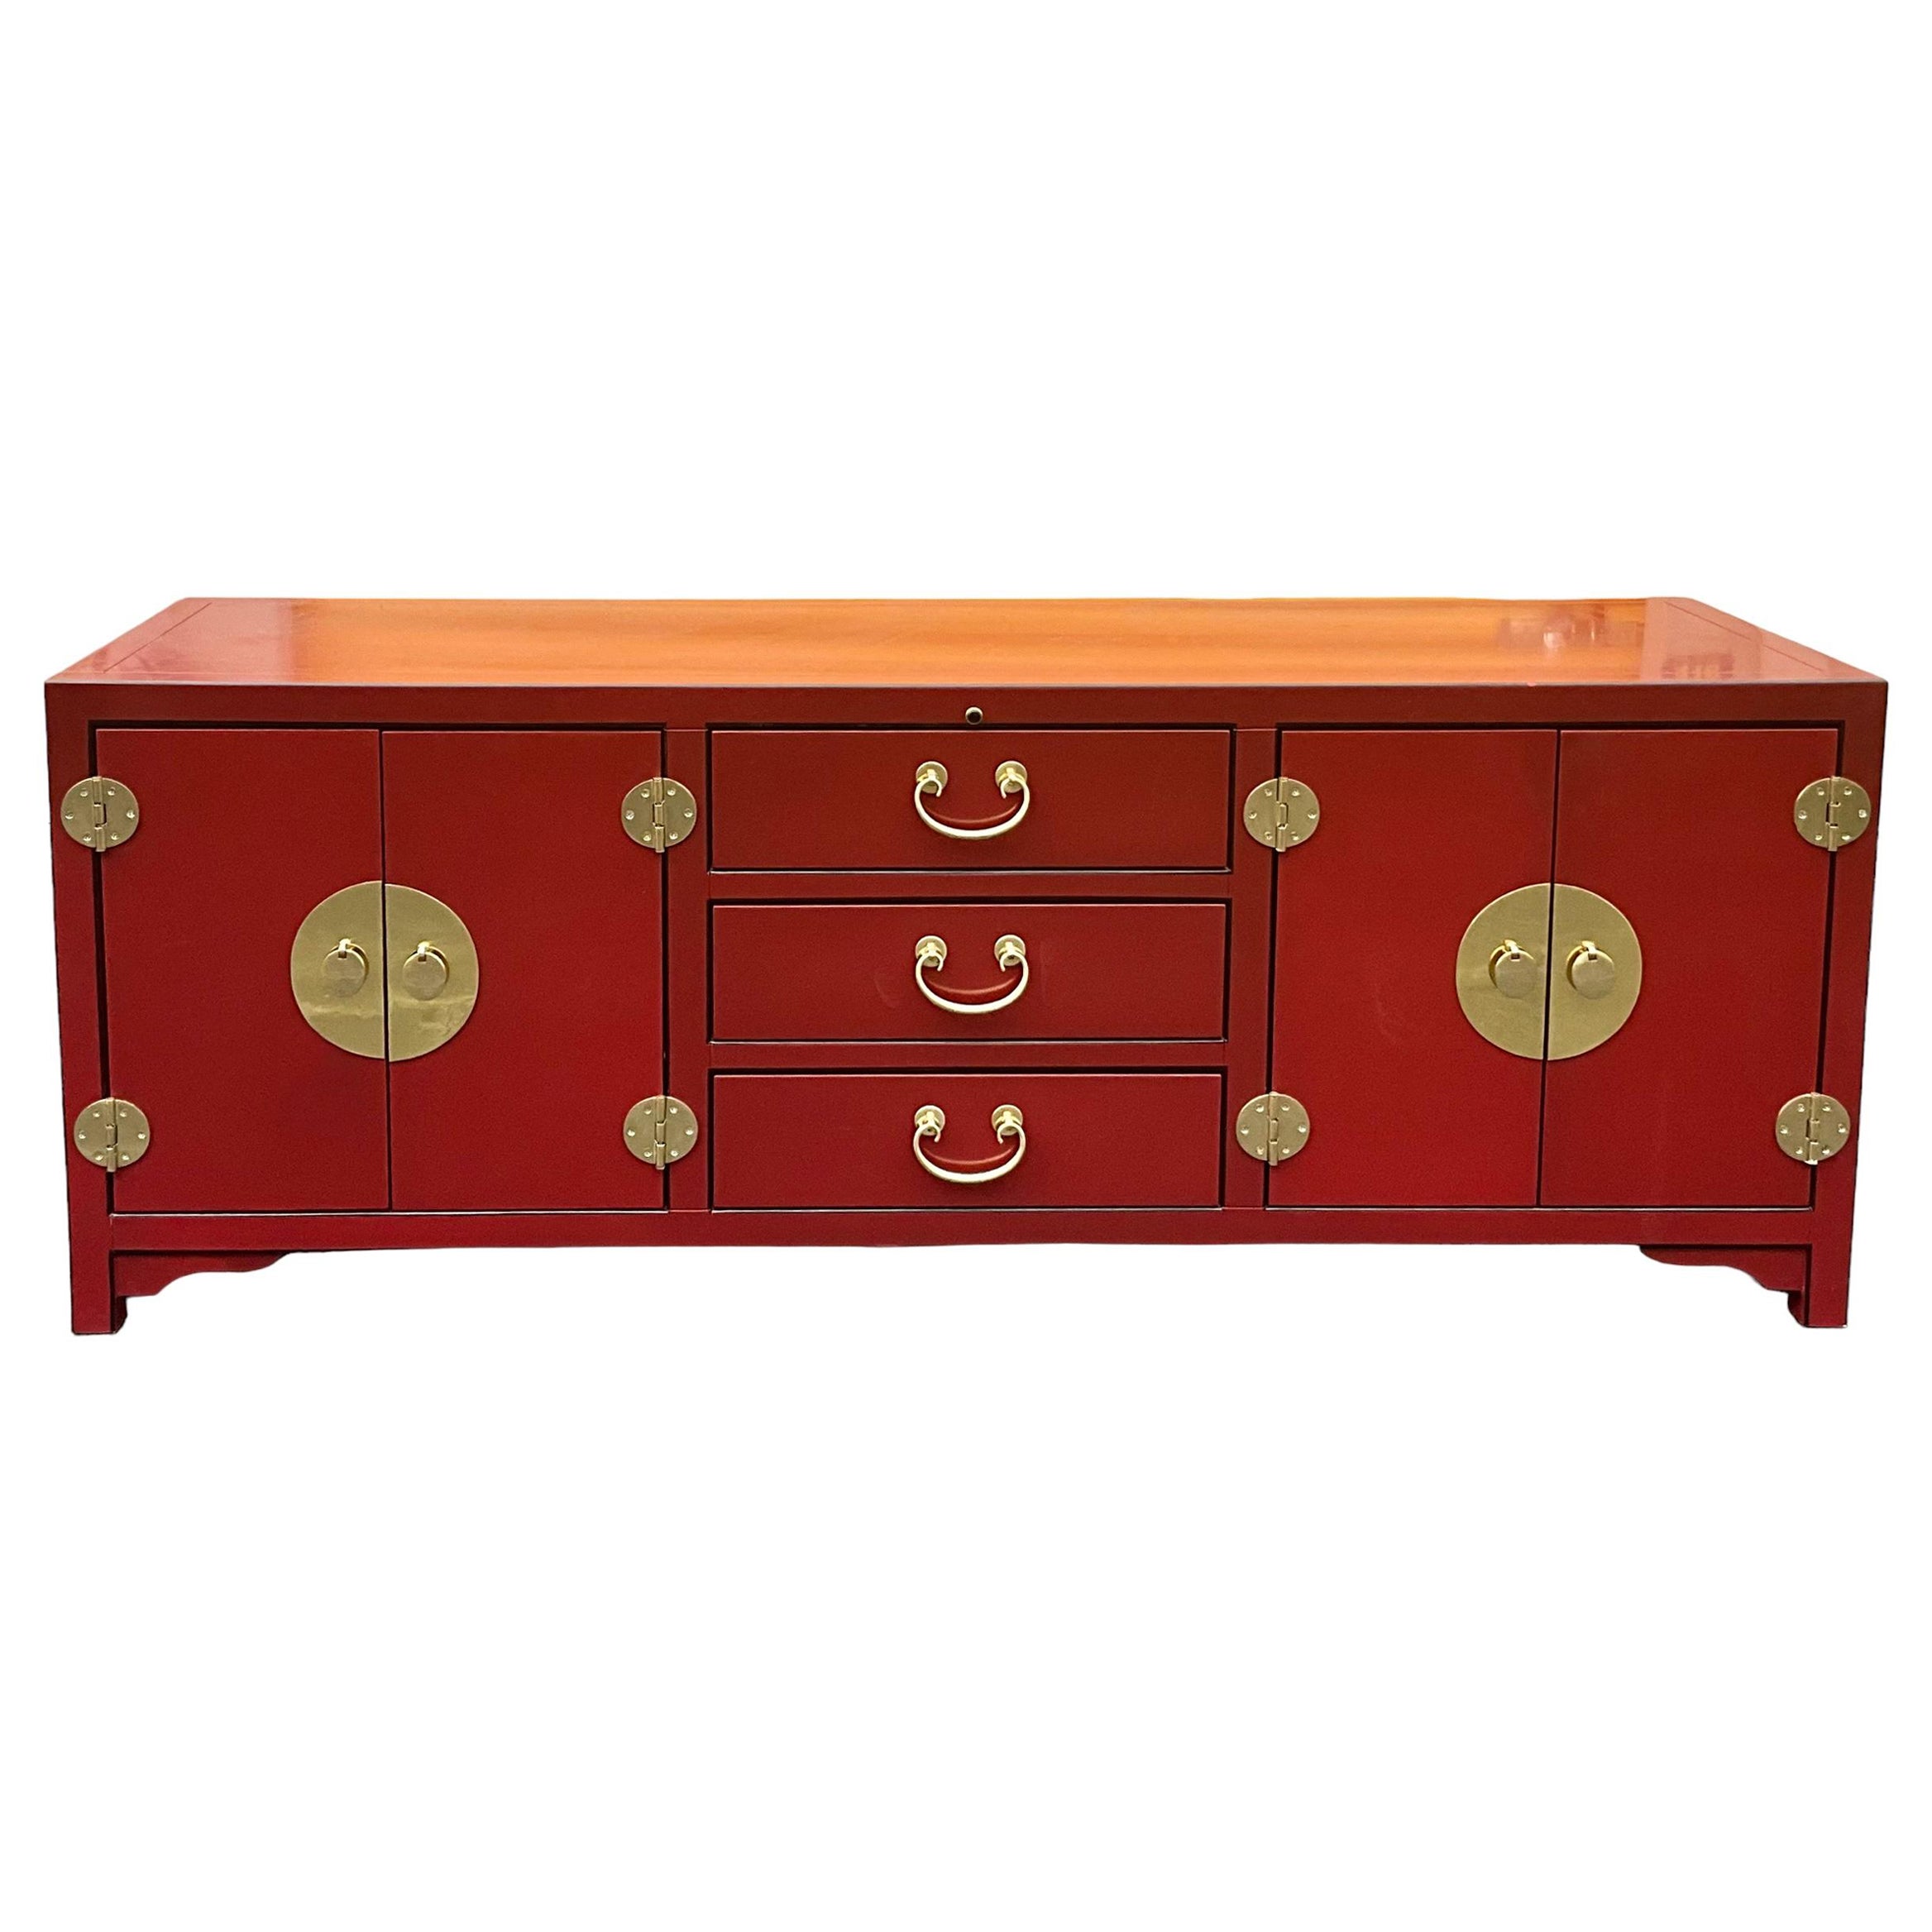 Late 20th-C. Ming Style Red Lacquer & Brass Credenza / Media Cabinet By Sligh 